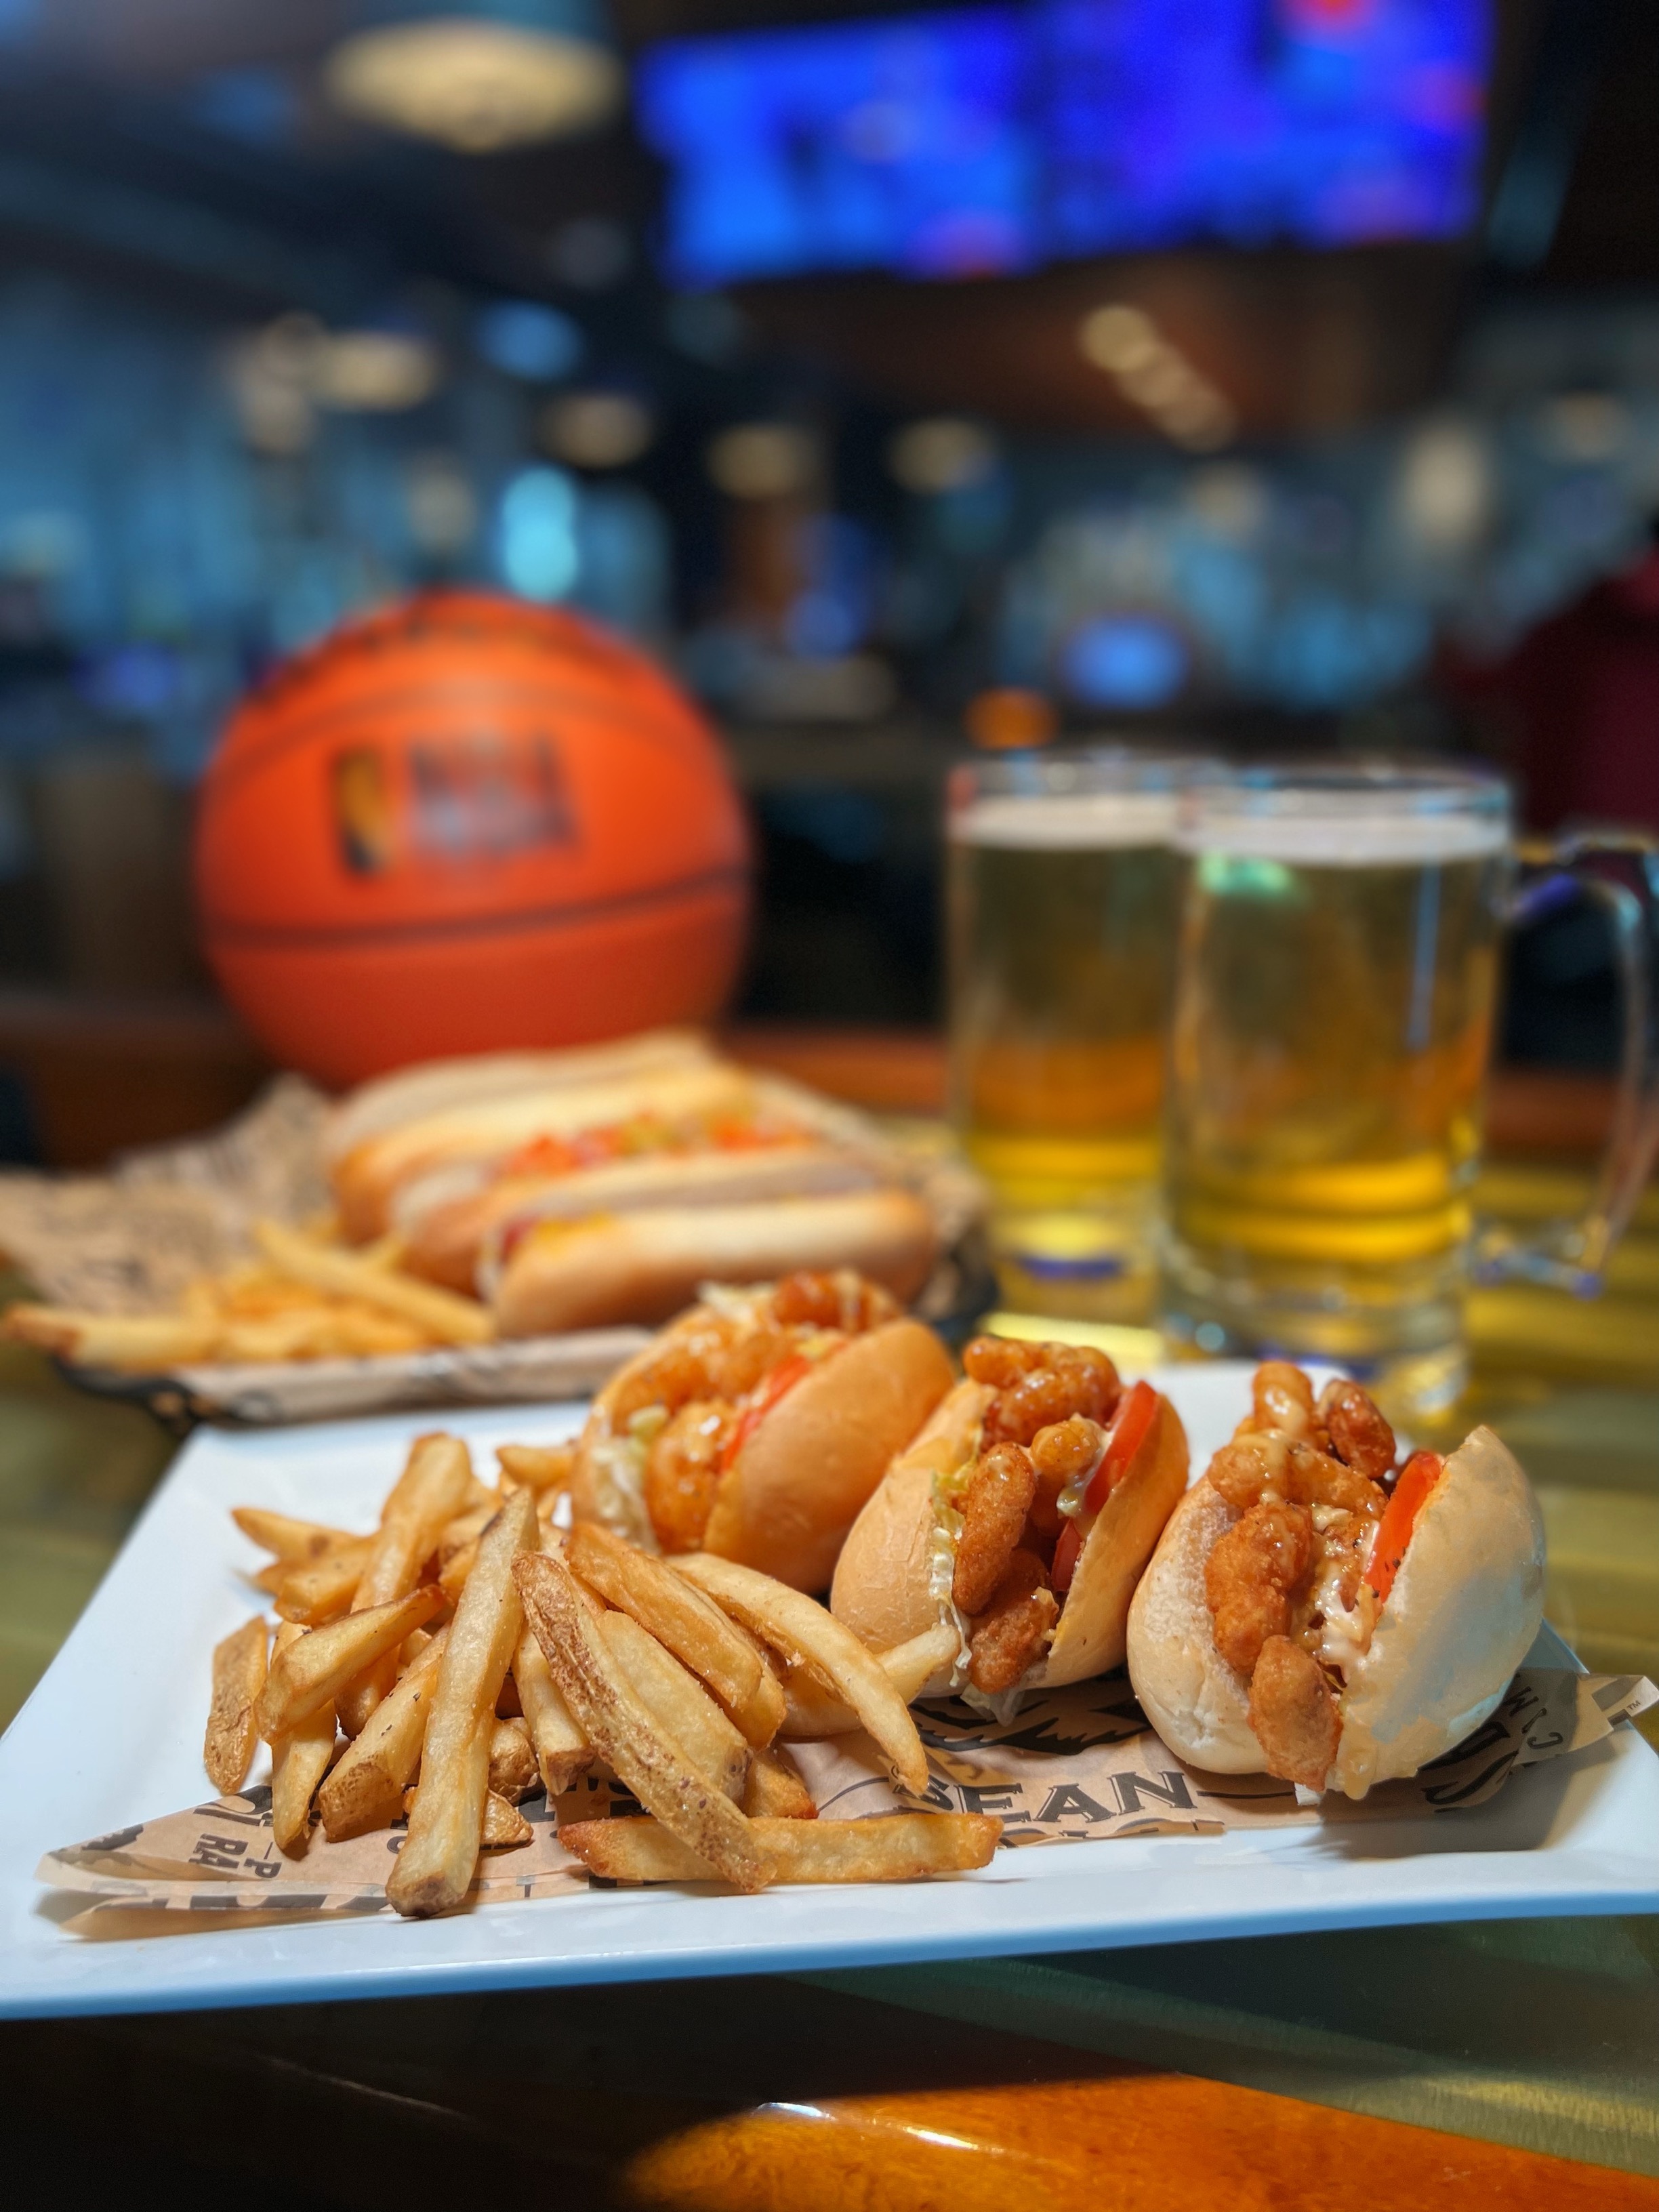 March Madness special at PT's Tavern - Cajun shrimp po-boy with fries